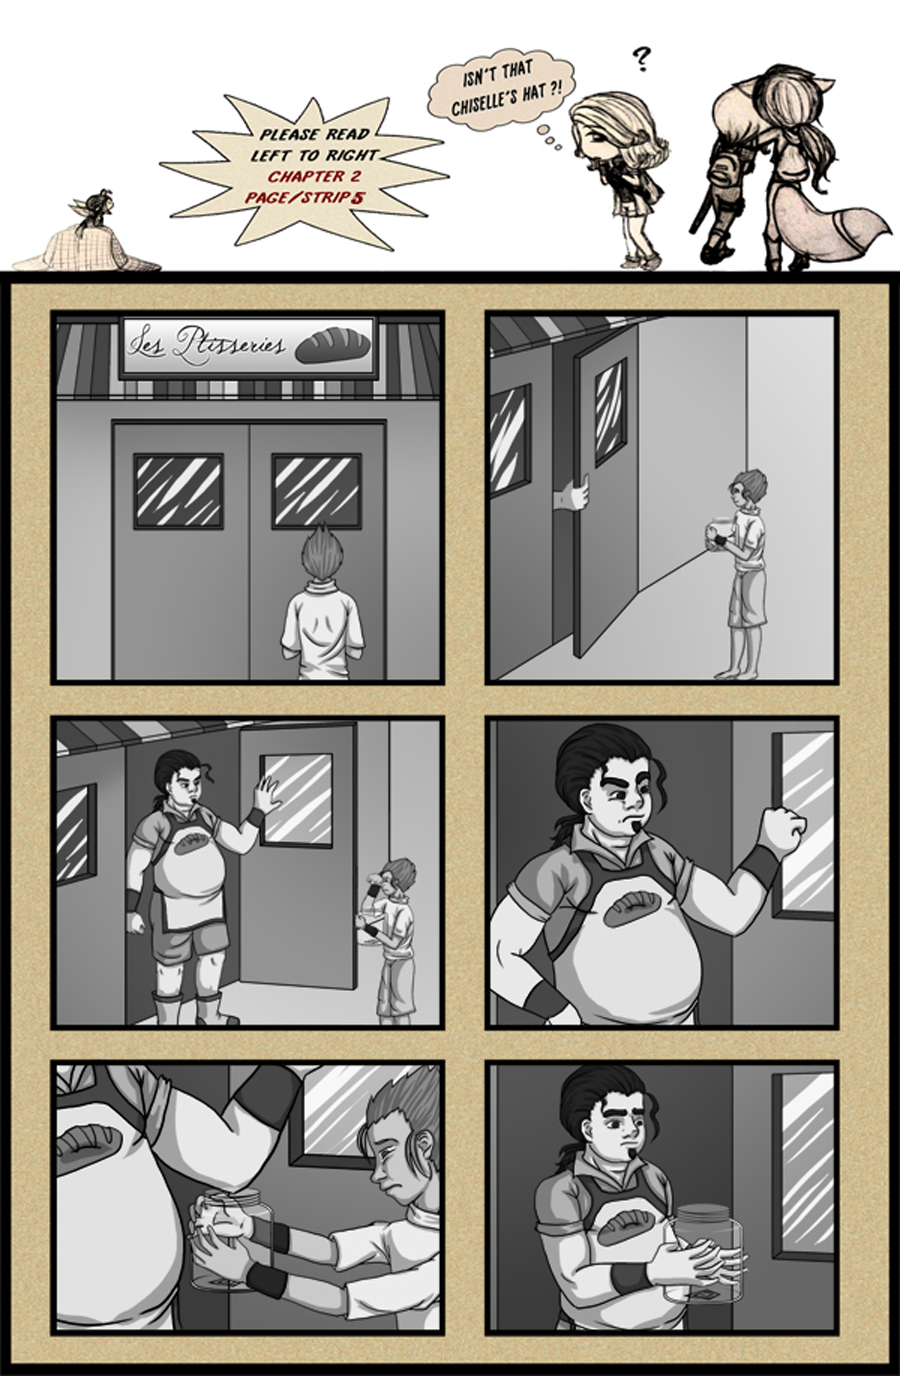 CH2 Strip 5: Back to the Bakery